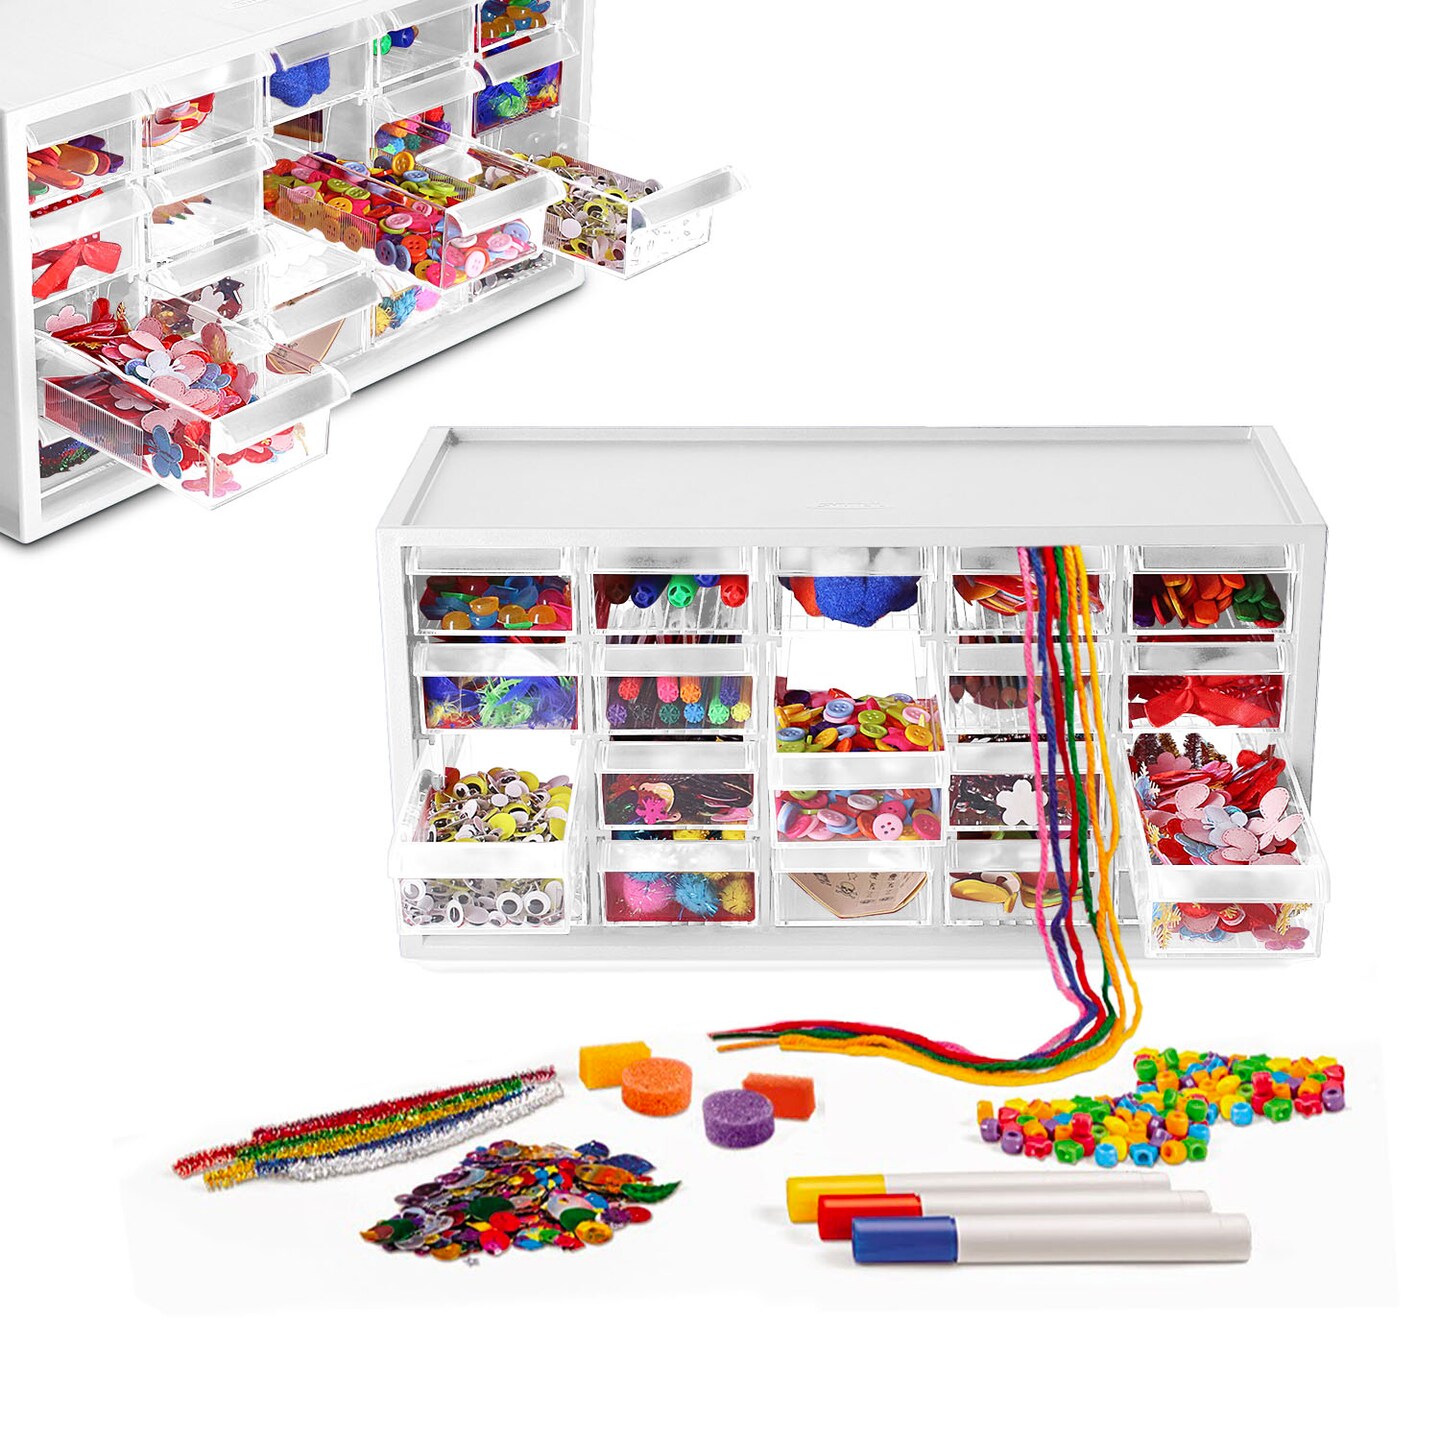 Kids Arts And Crafts Supplies Set Giftable Craft Box For Kids: Diy